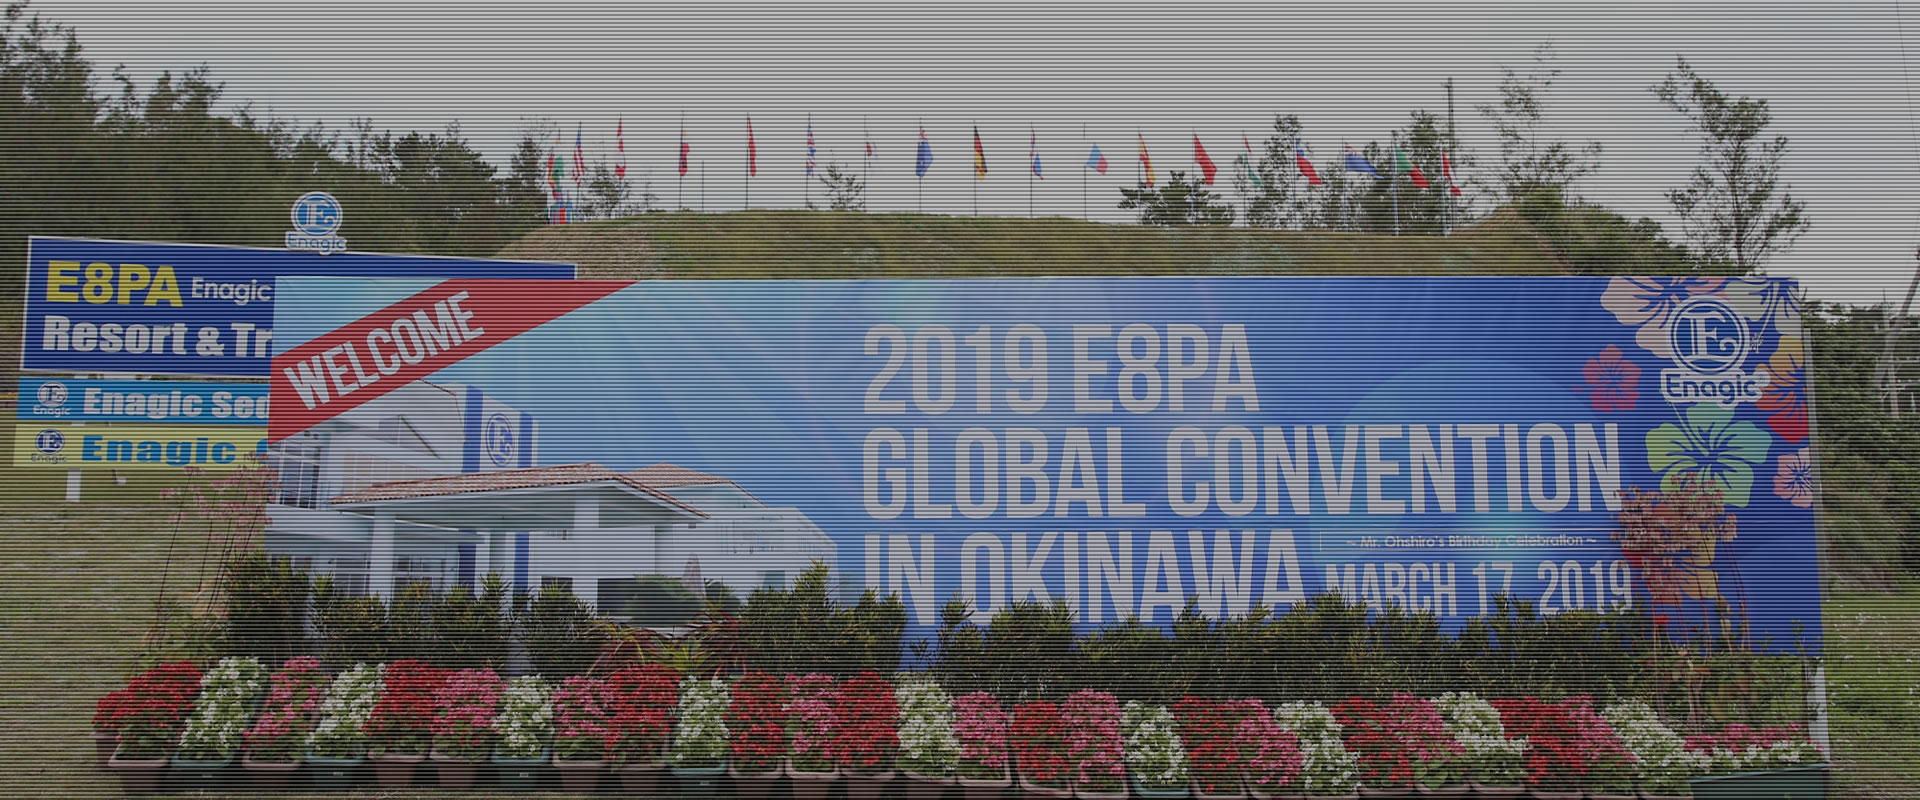 2019 E8PA GLOBAL CONVENTION in Okinawa